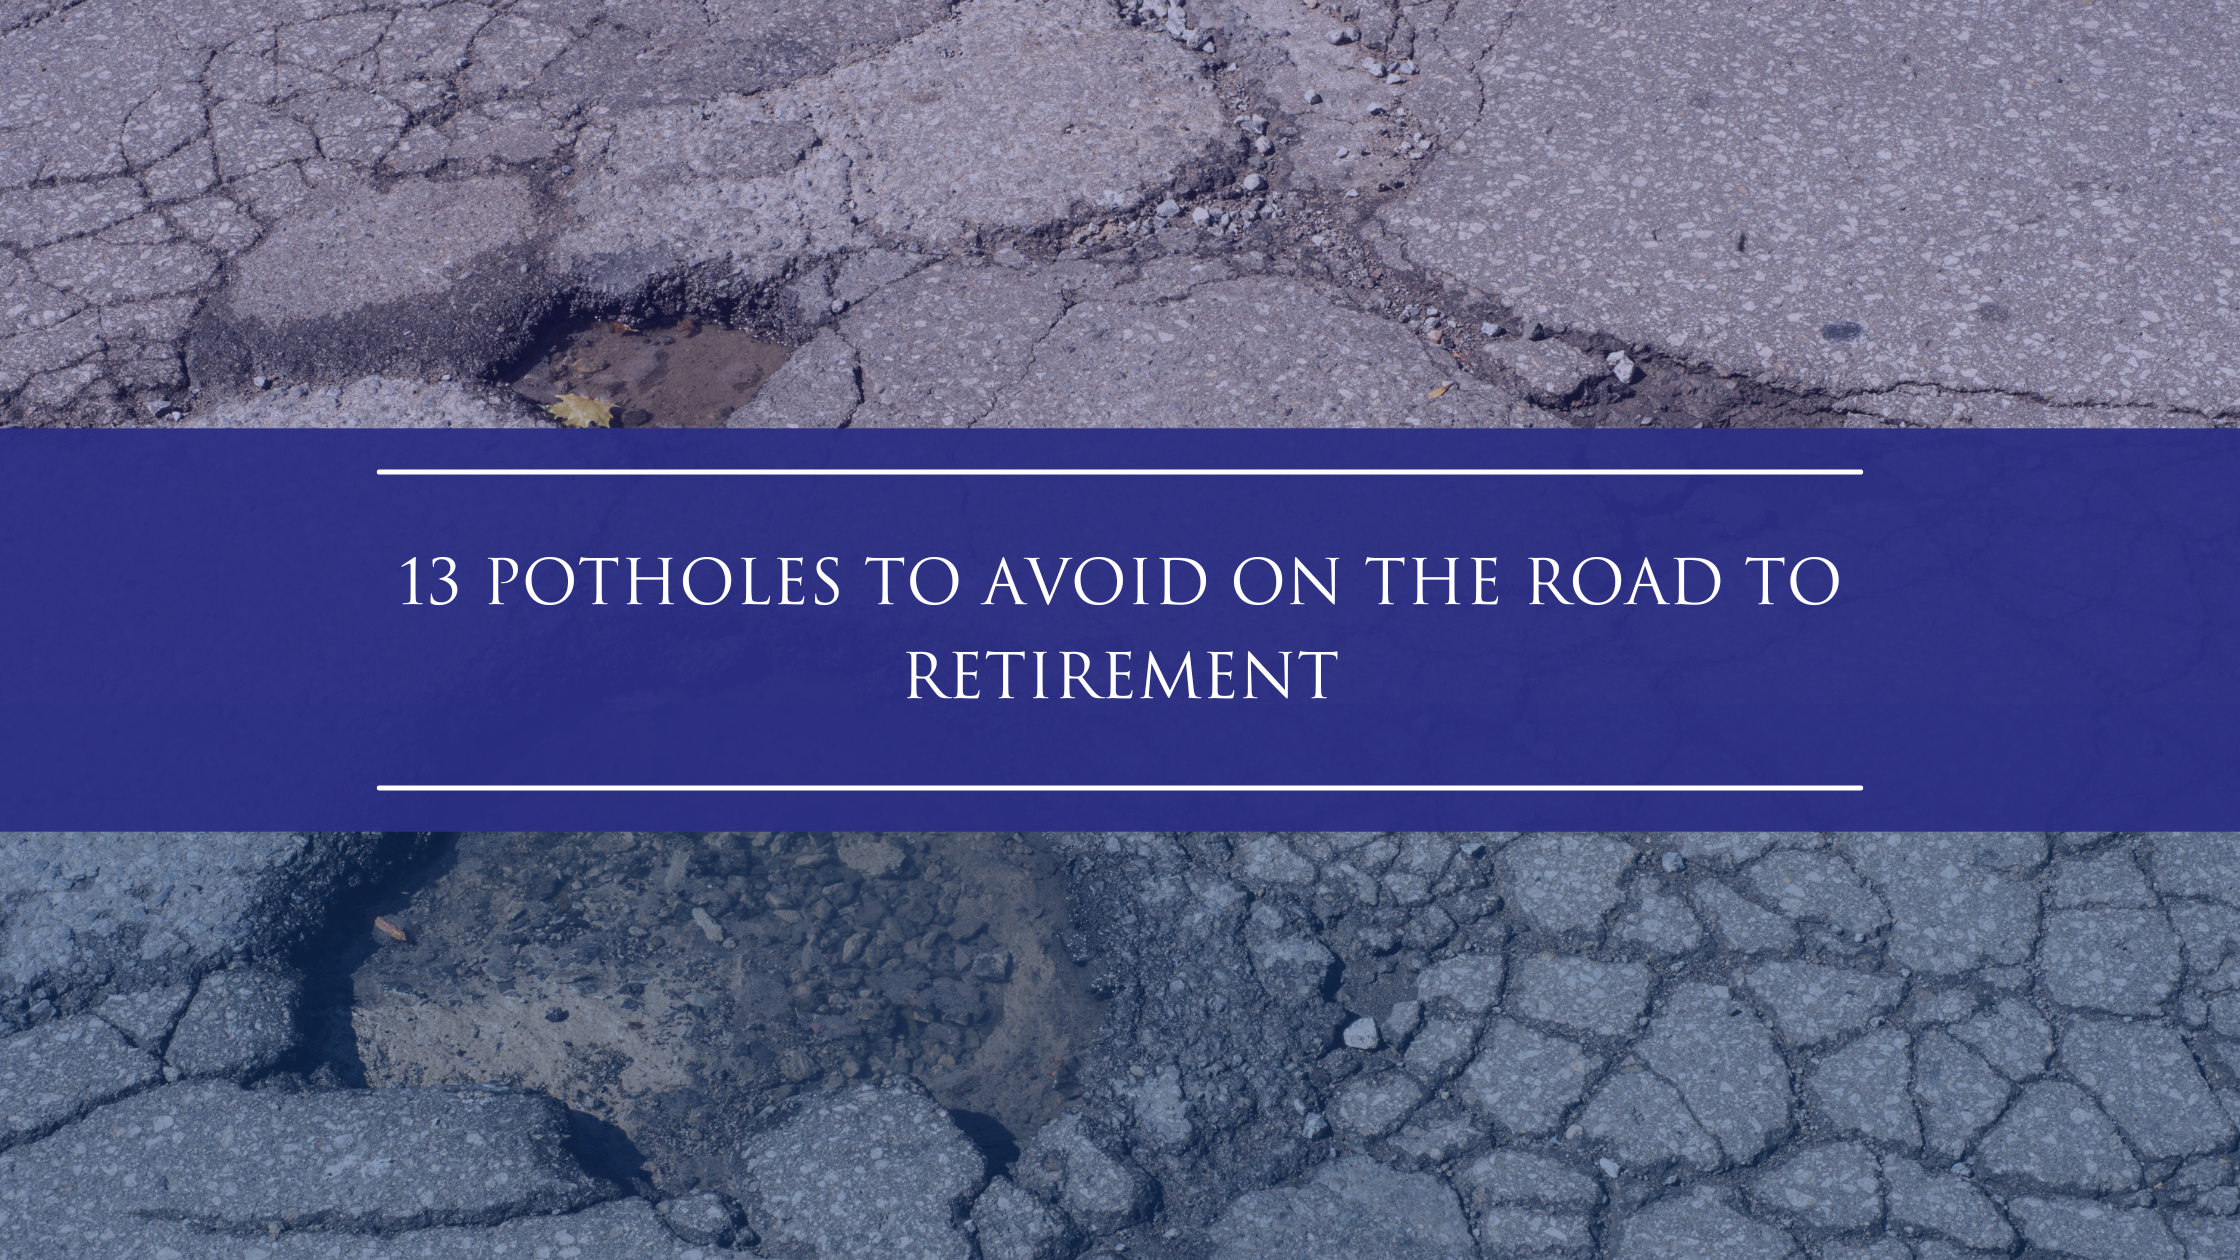 13 Potholes To Avoid On The Road To Retirement